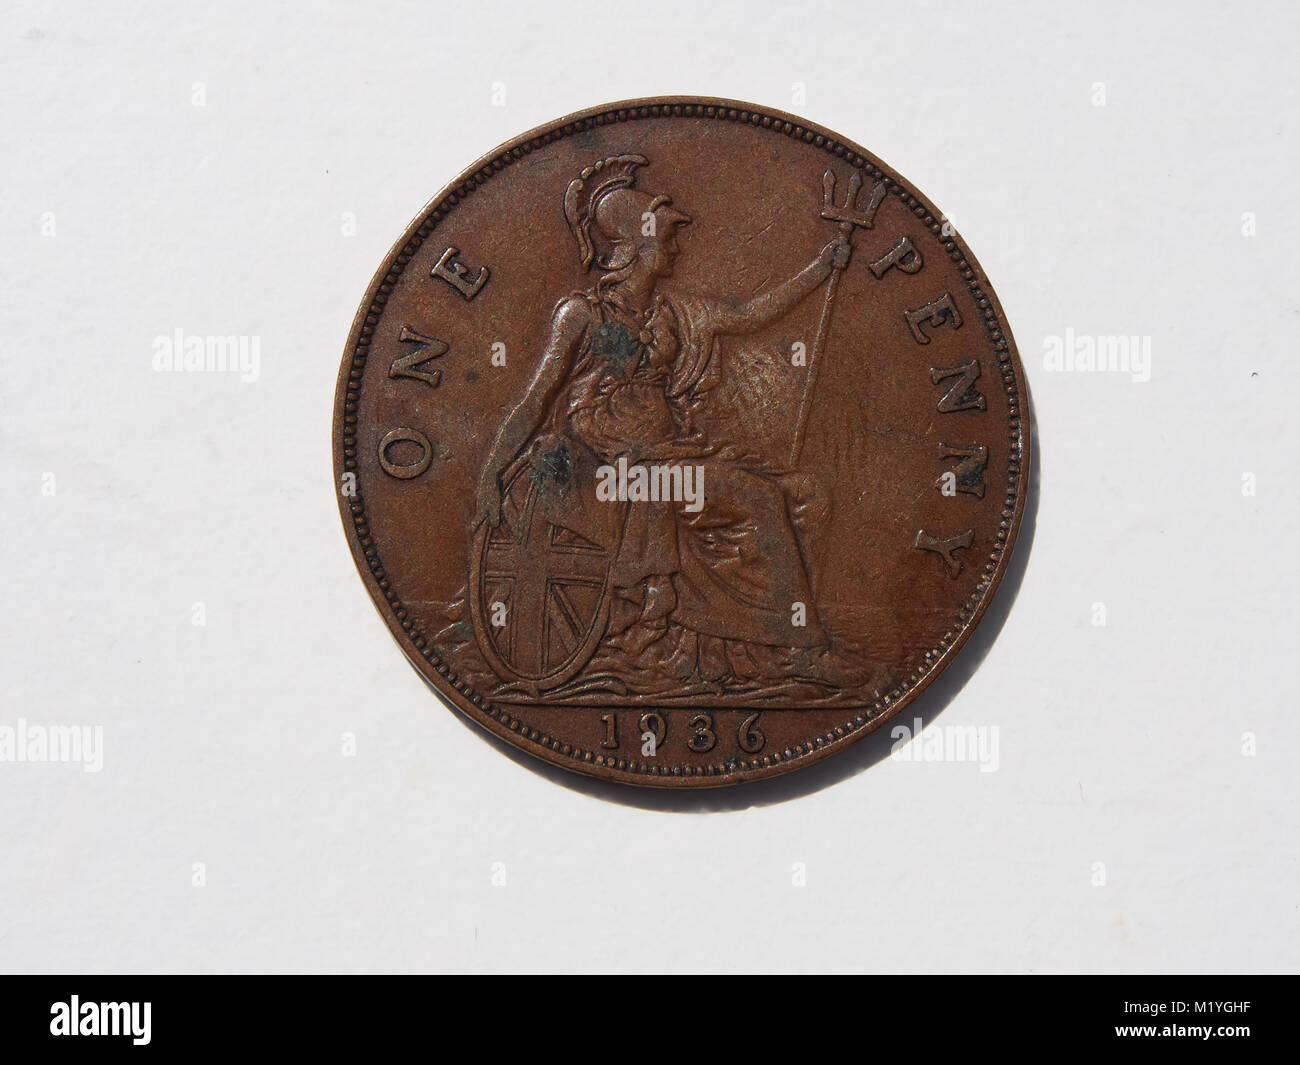 A 1936 British one Penny coin showing Brittania Stock Photo